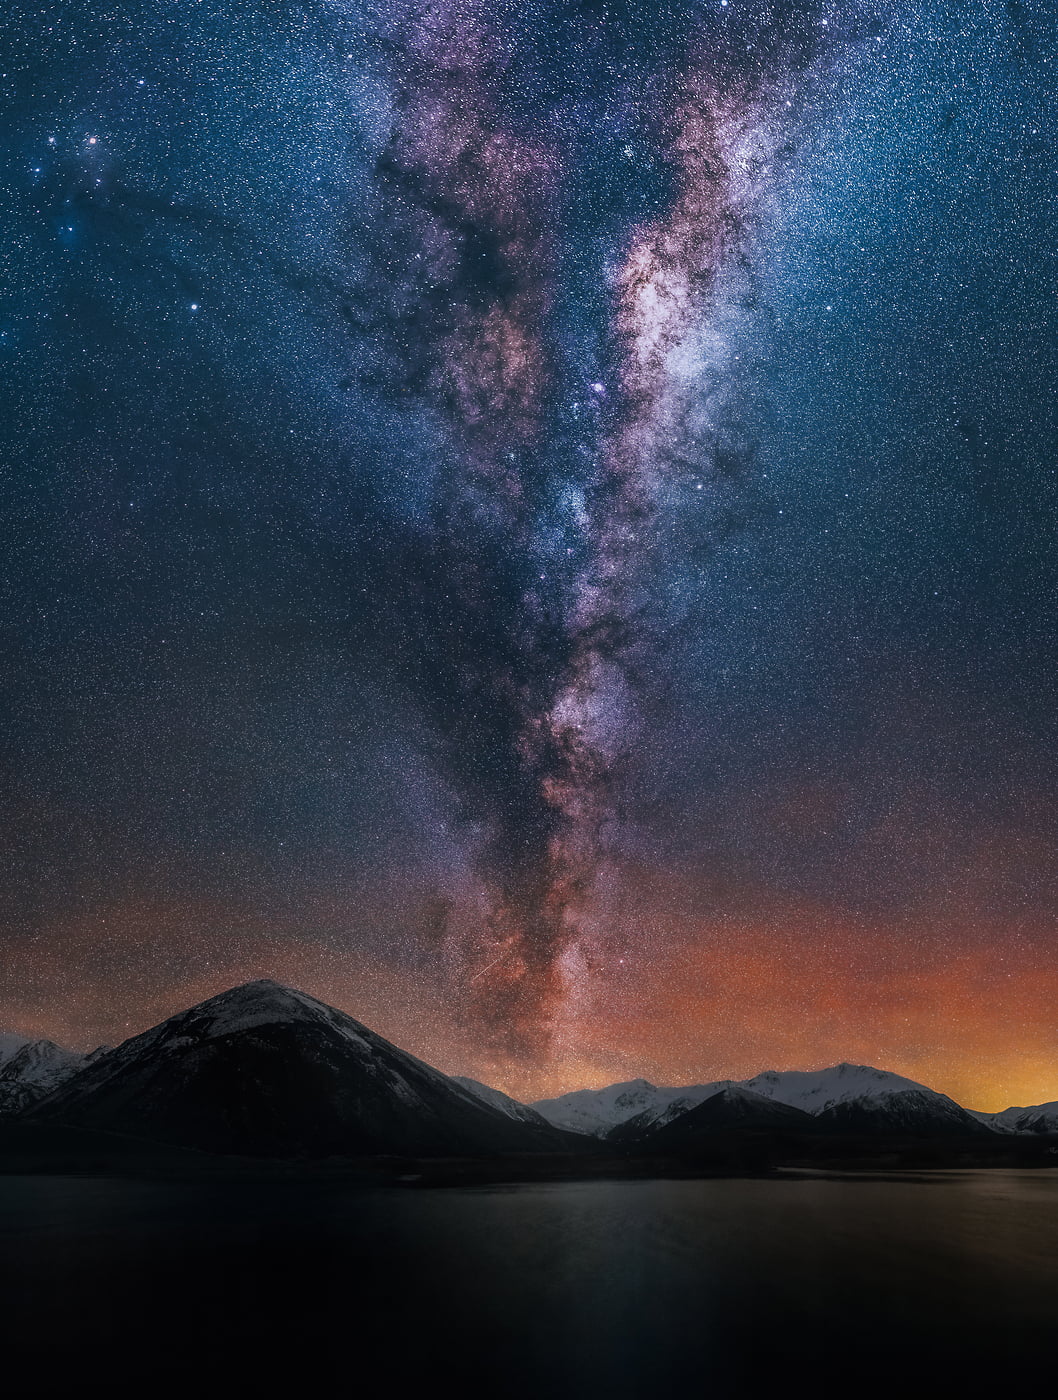 298 megapixels! A very high resolution, large-format VAST photo print of the night sky, milky way, and stars over mountains and a lake; fine art astrophotography landscape photo created by Paul Wilson in New Zealand.